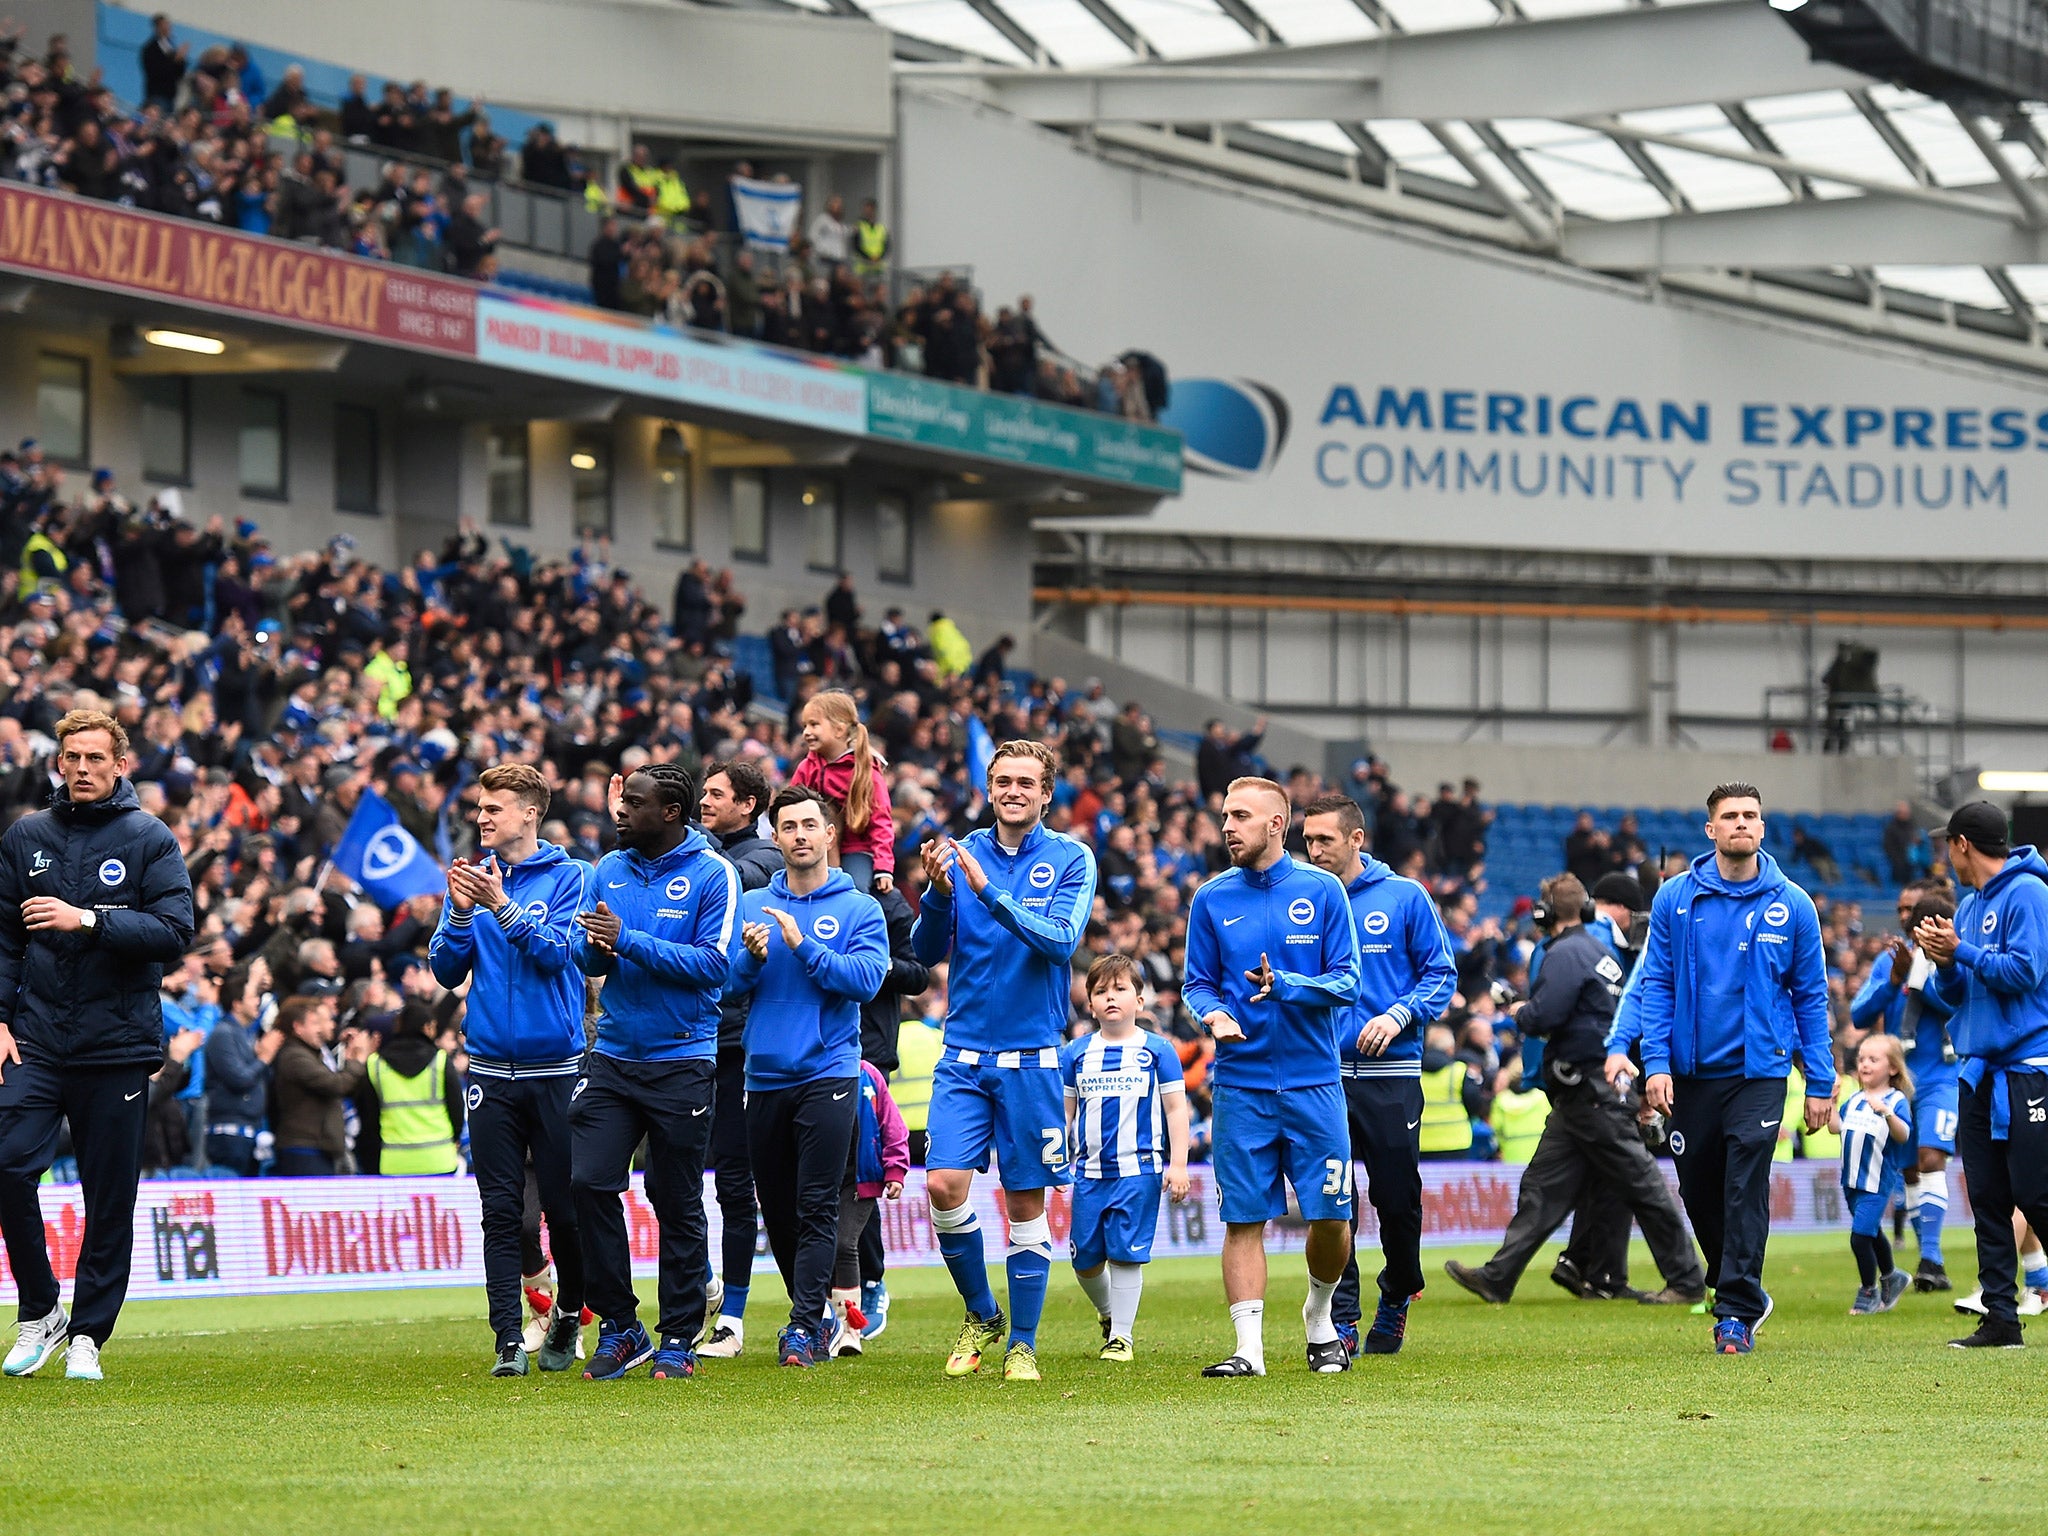 The Brighton &amp; Hove Albion players salute the crowd after their final home game